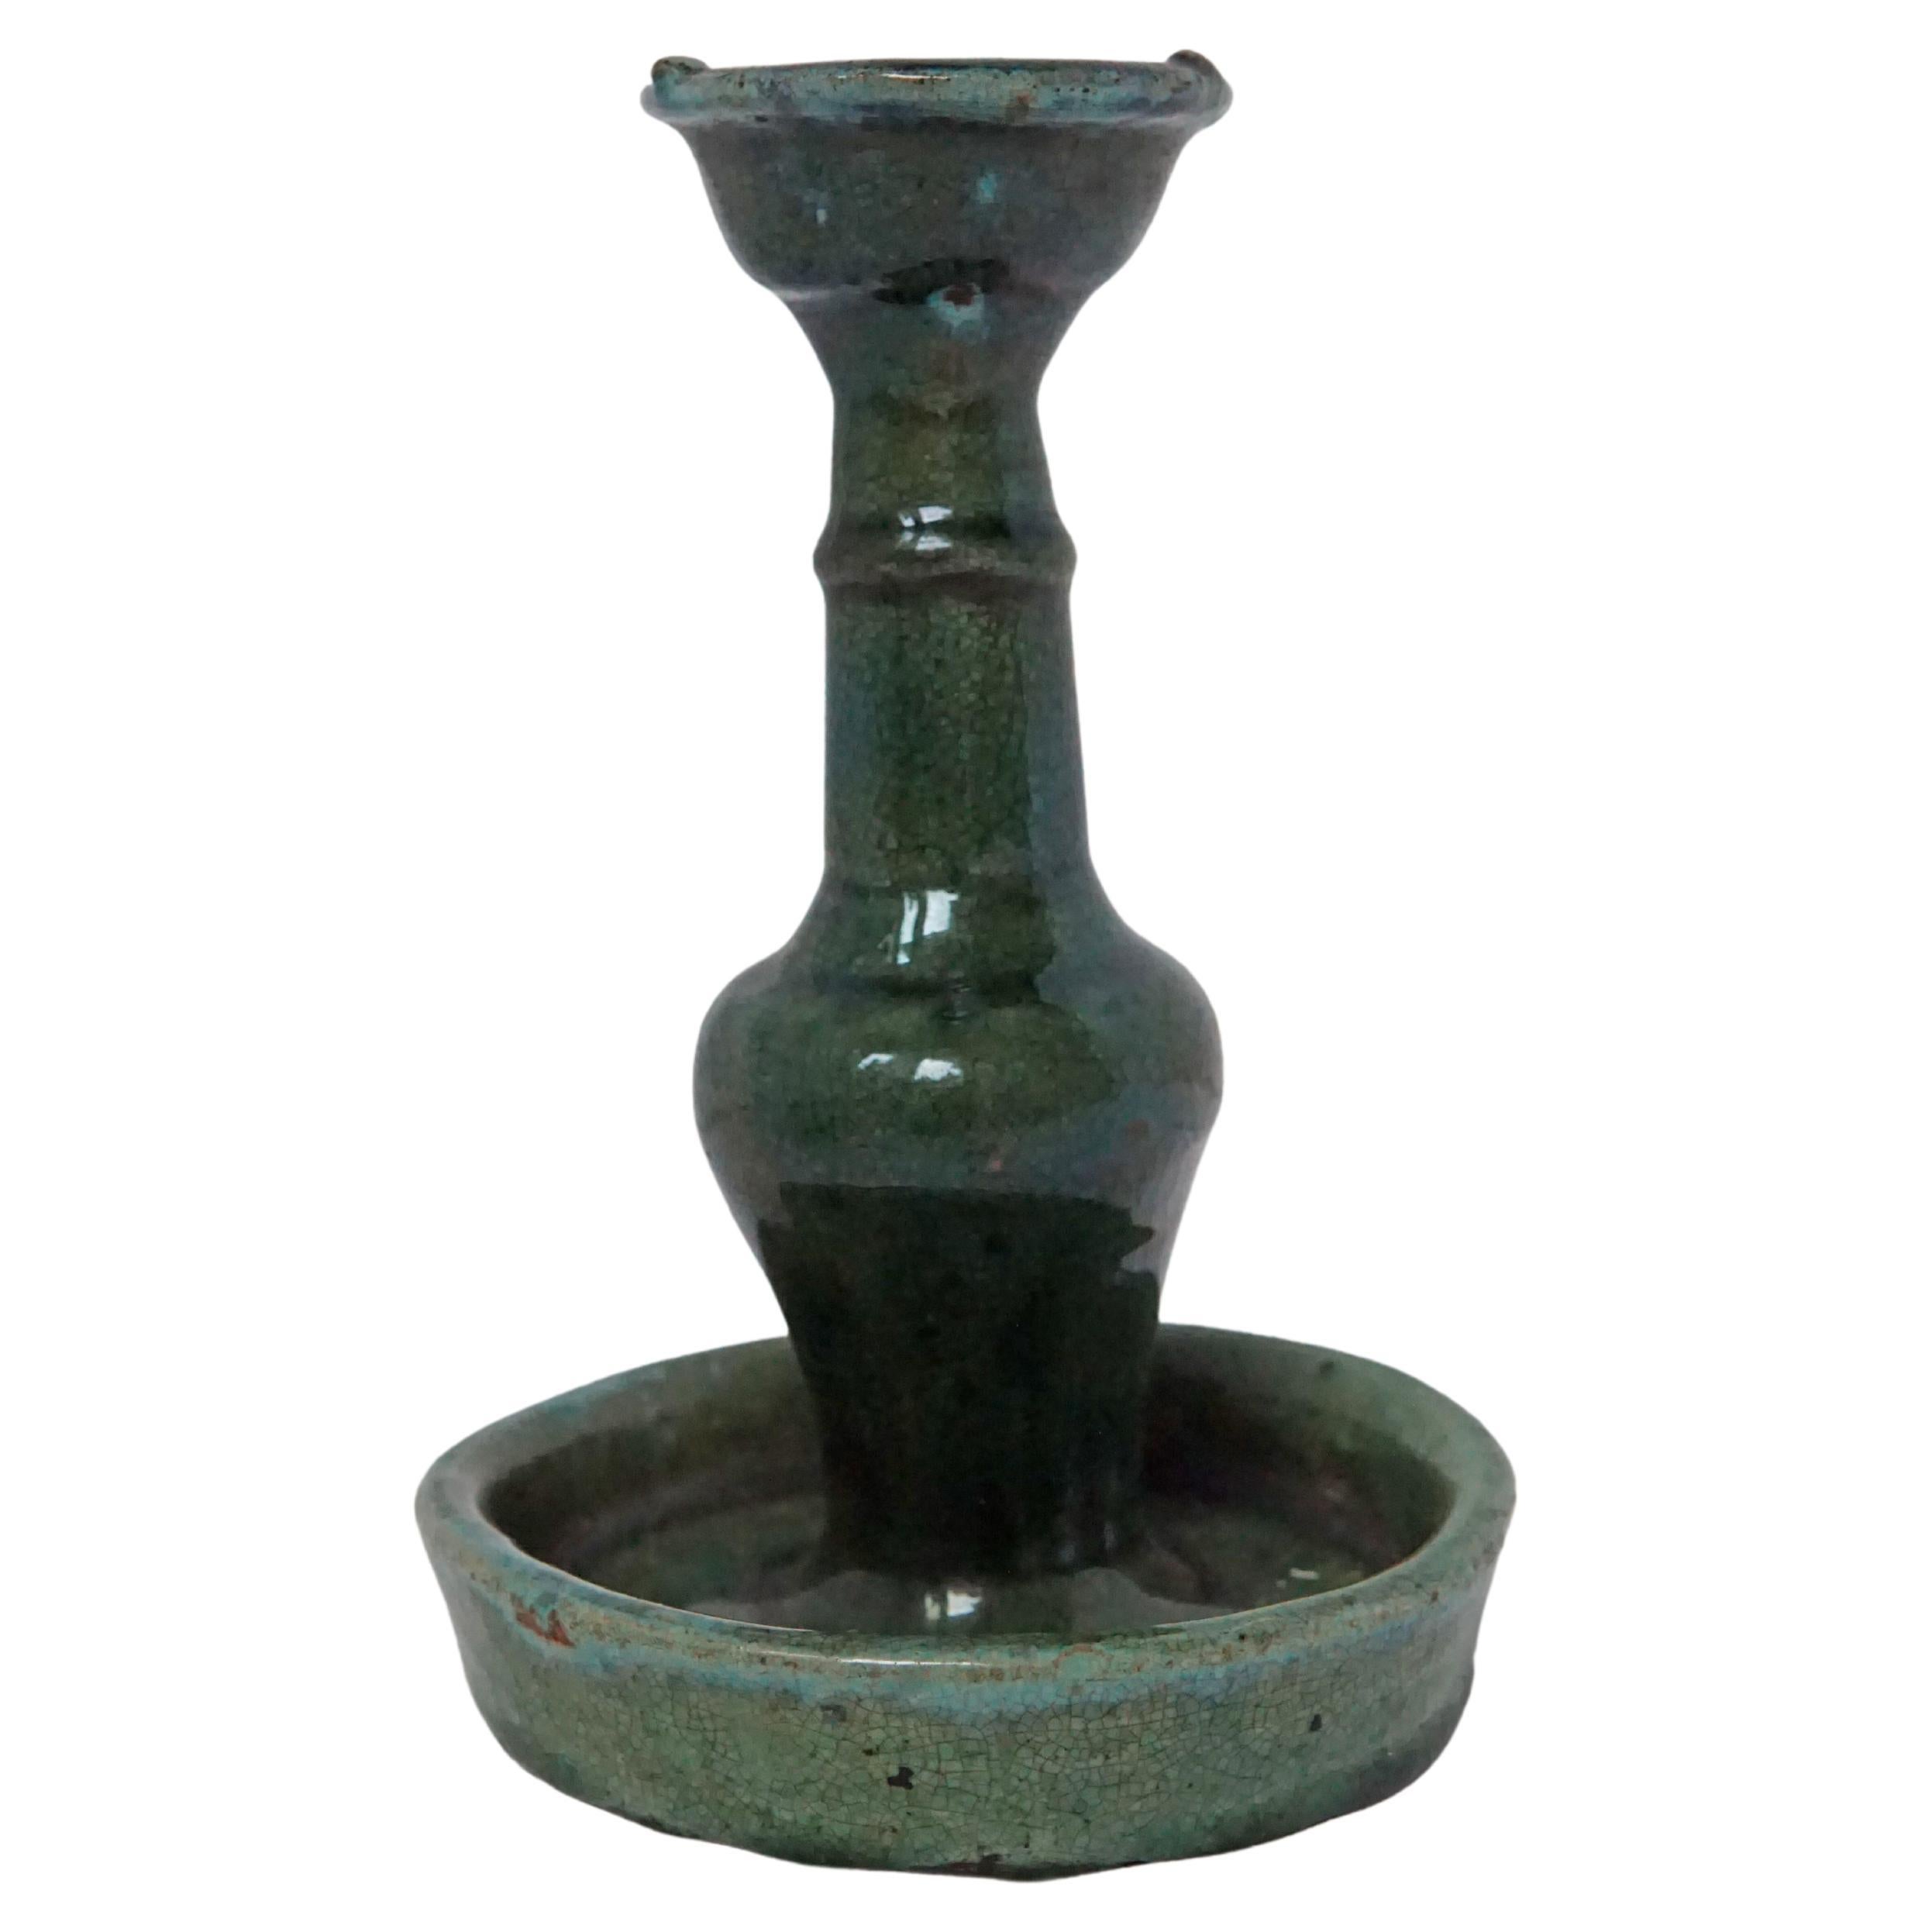 Chinese Ceramic 'Shiwan' Oil Lamp / Candle Holder, Green Glaze, c. 1900